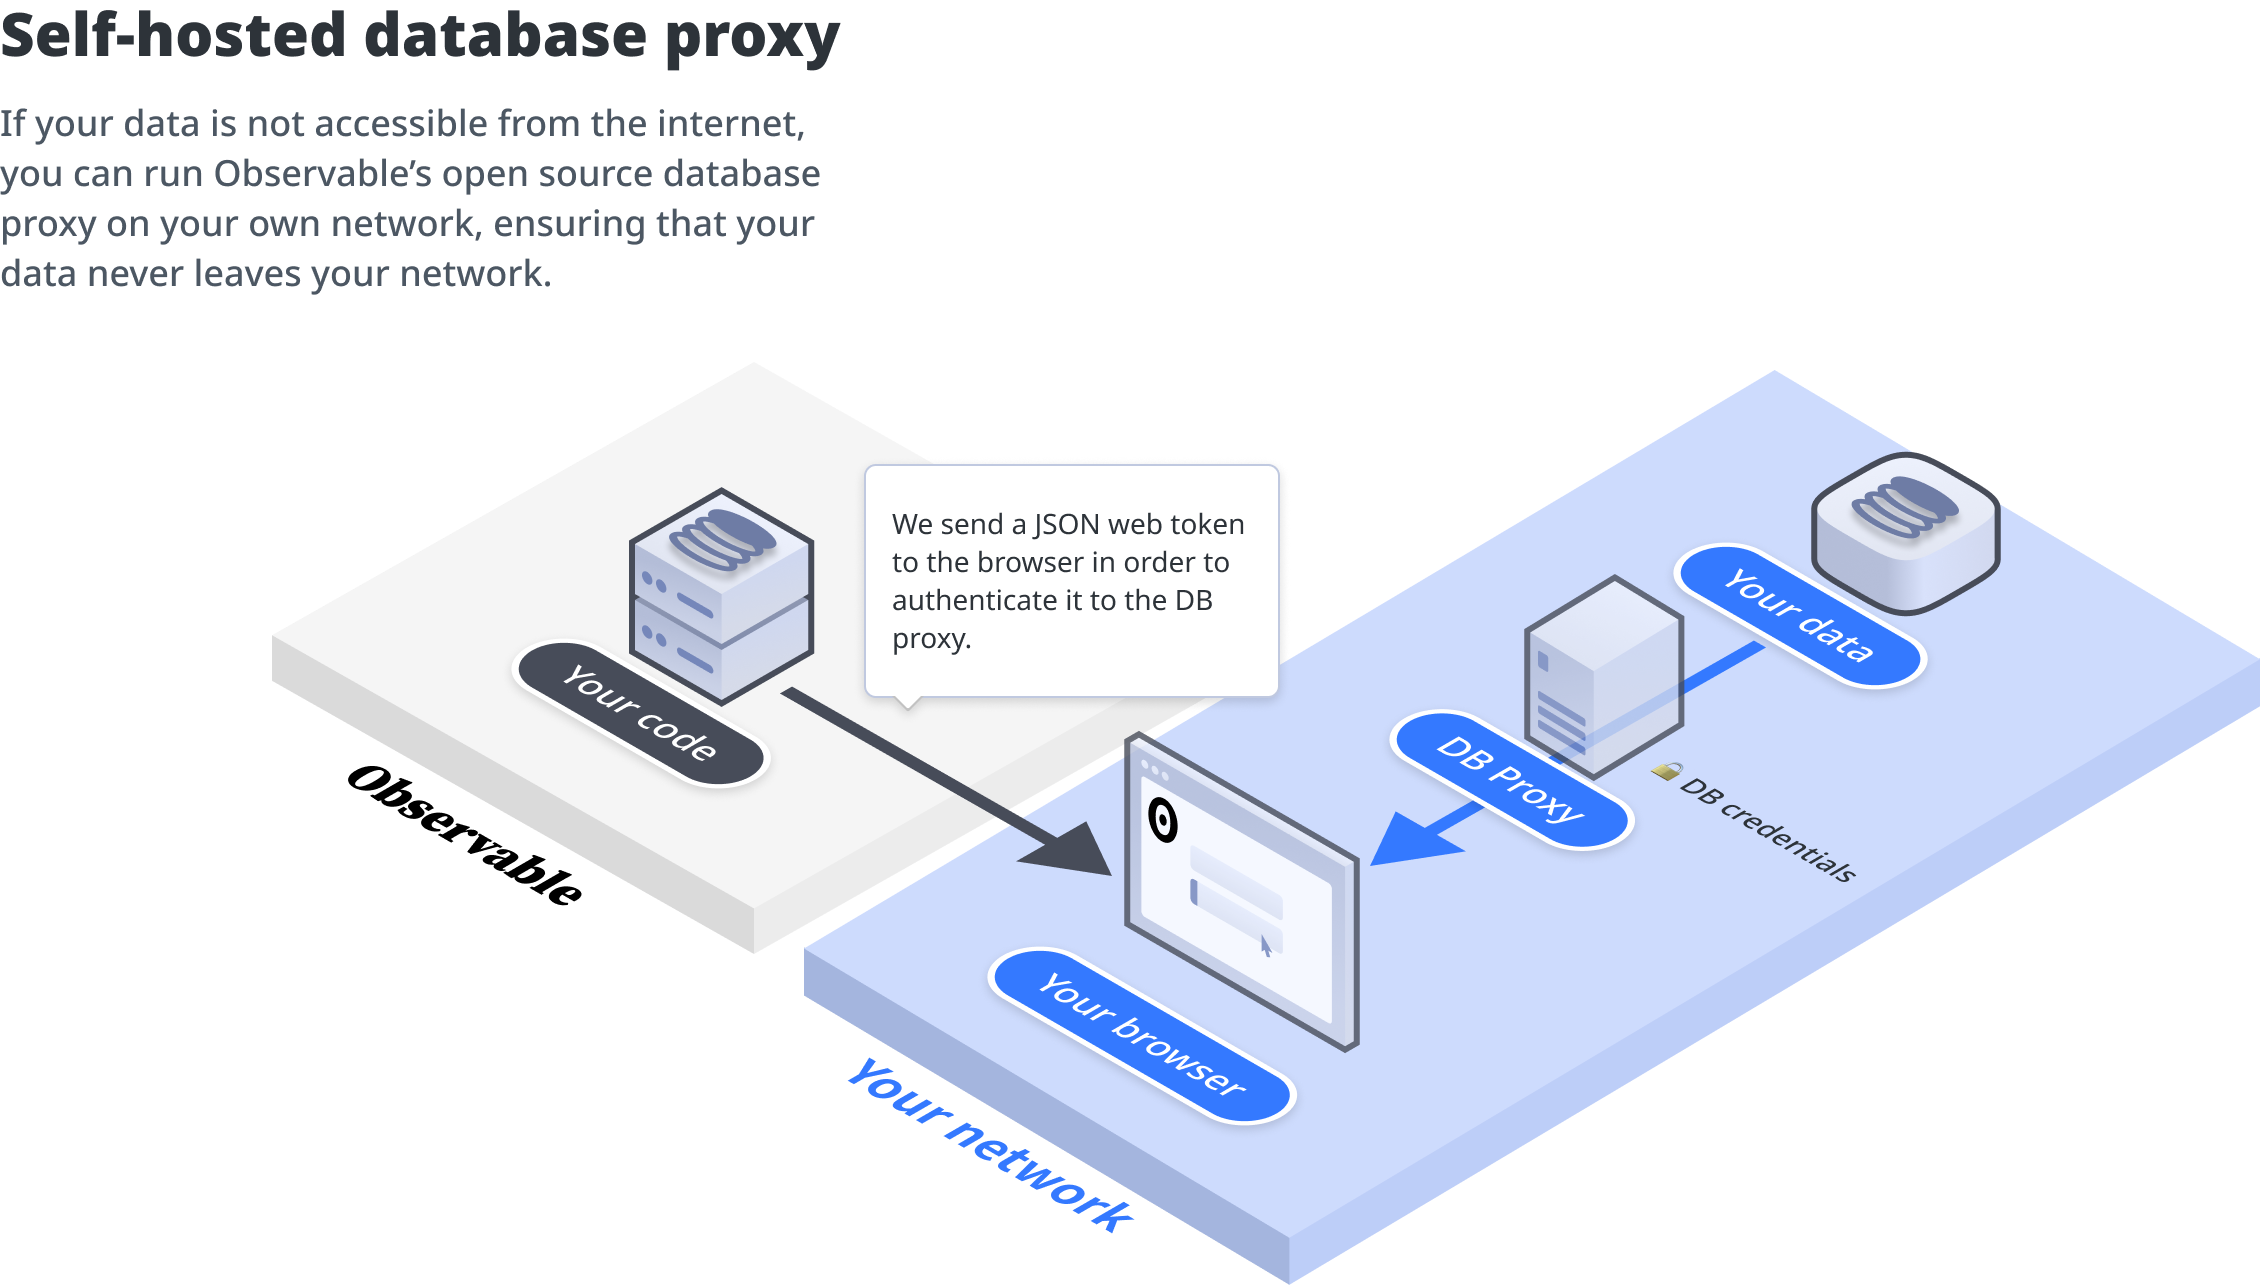 Diagram of the data flow when using the self-hosted database proxy. Data never leaves the customer's network, notebooks are served from Observable's servers.